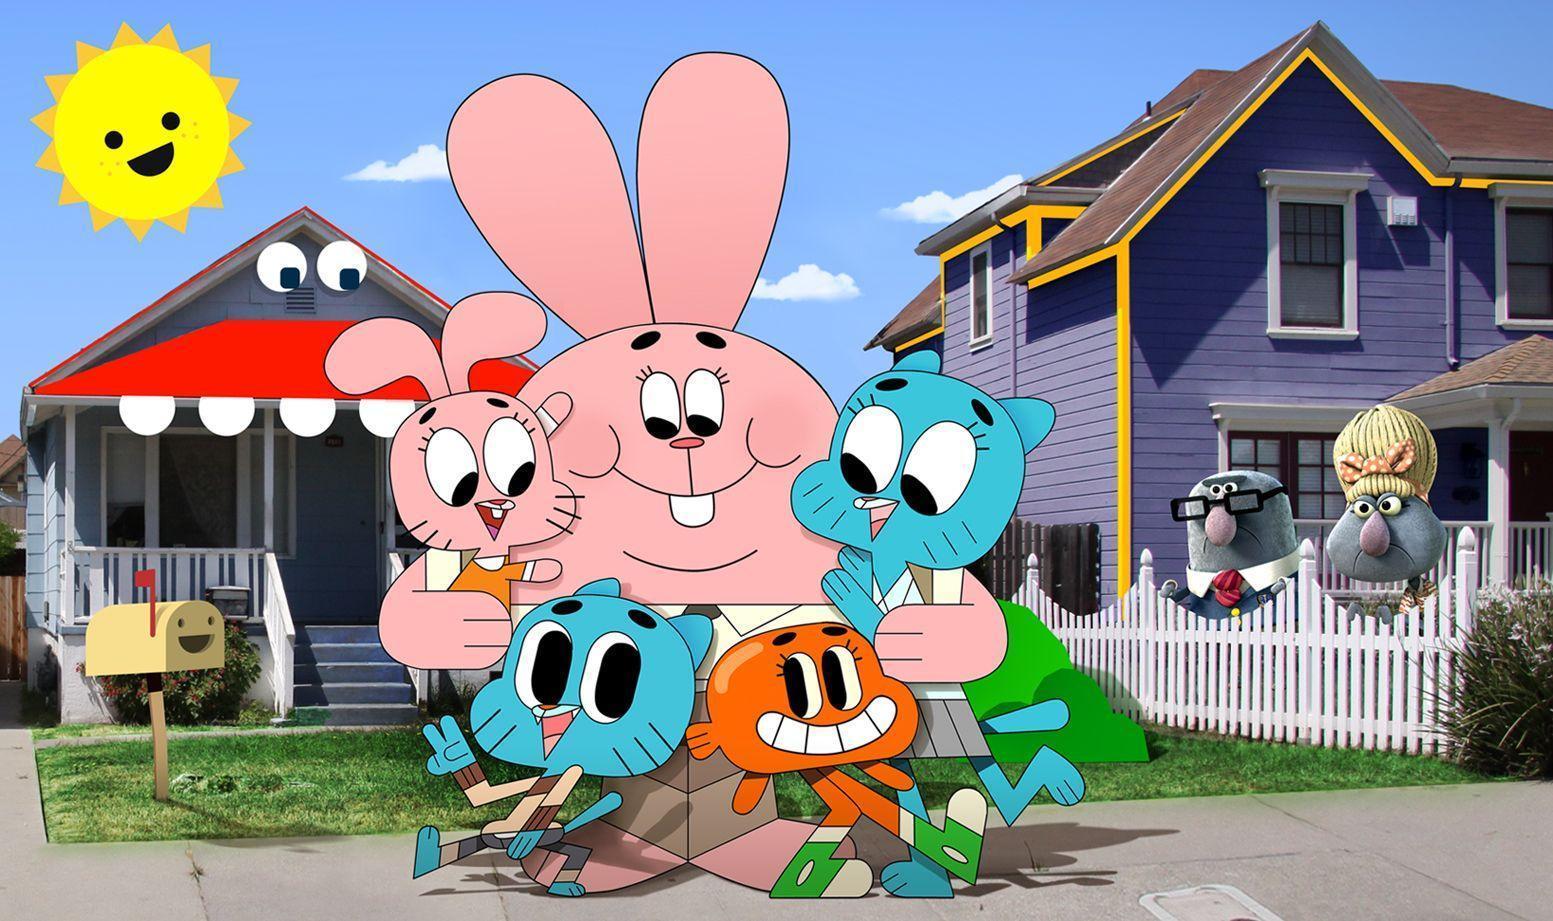 image about The amazing world of gumball. T